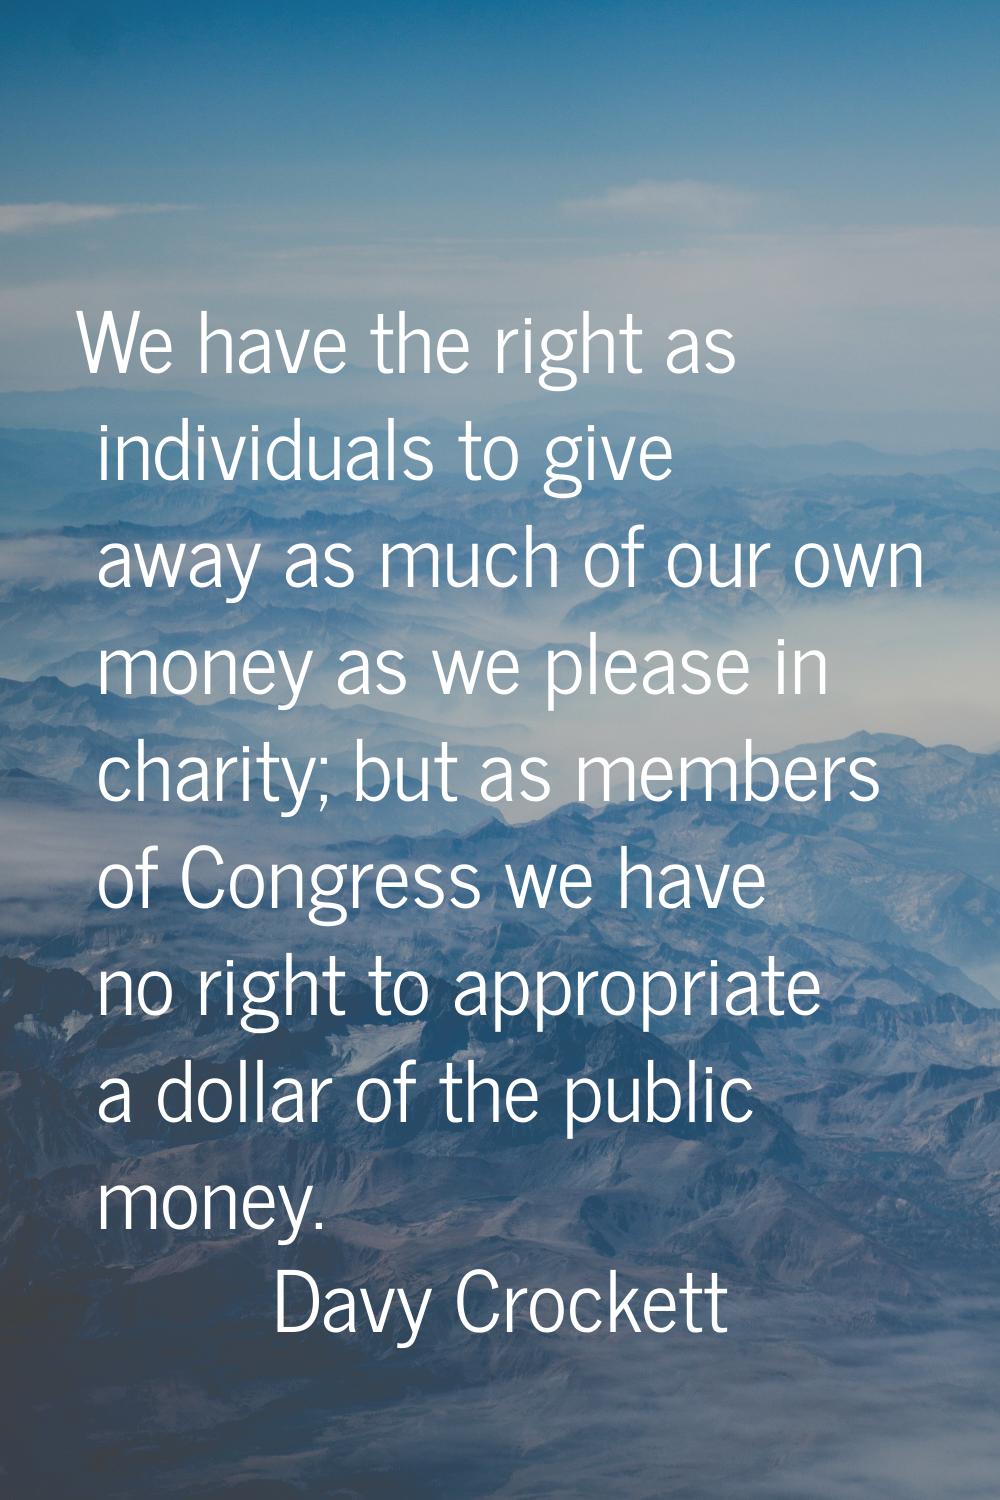 We have the right as individuals to give away as much of our own money as we please in charity; but